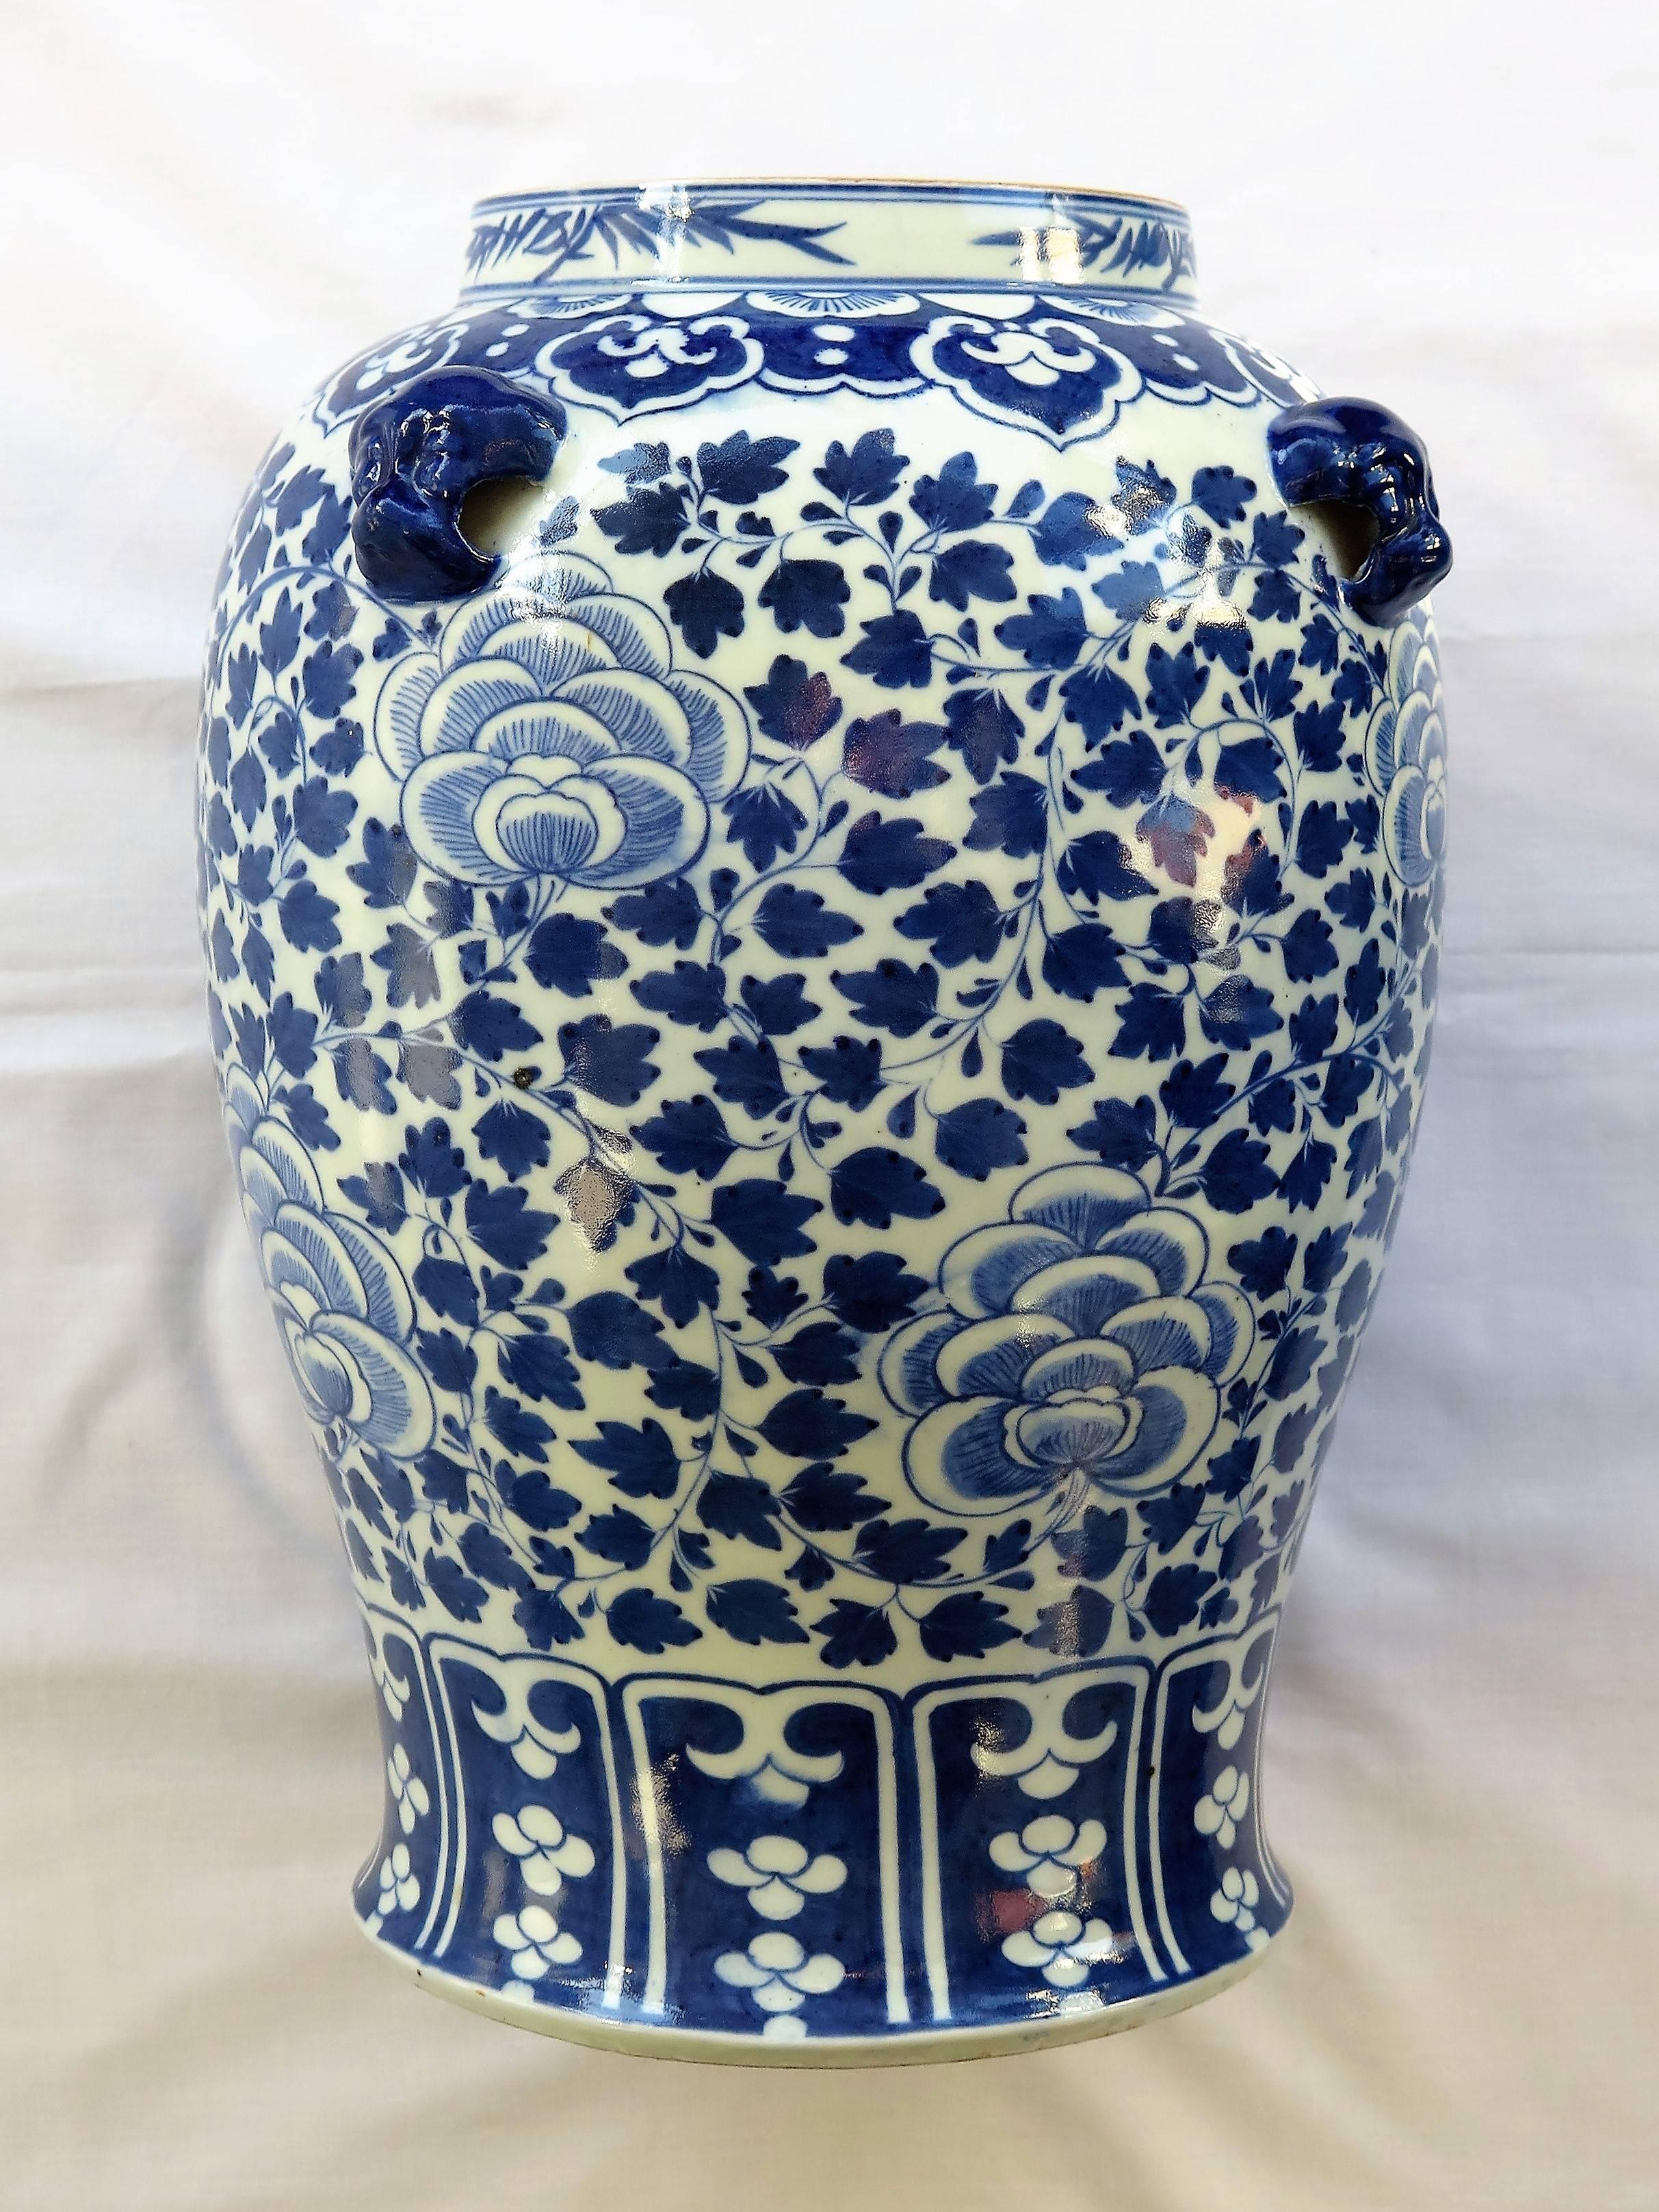 Chinese Porcelain Large Lidded Vase or Jar Blue and White , 19th Century Qing 1